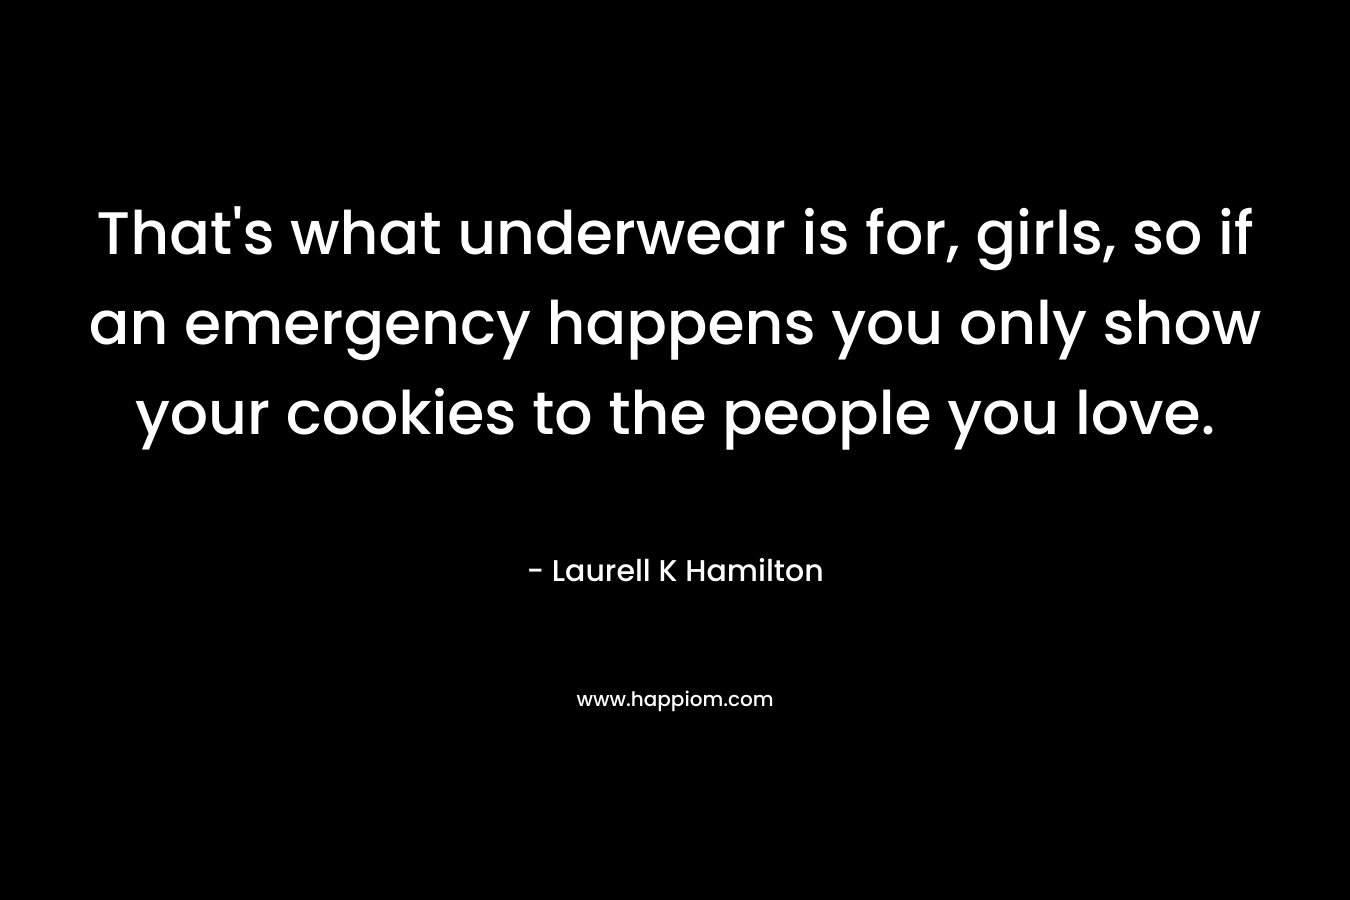 That’s what underwear is for, girls, so if an emergency happens you only show your cookies to the people you love. – Laurell K Hamilton